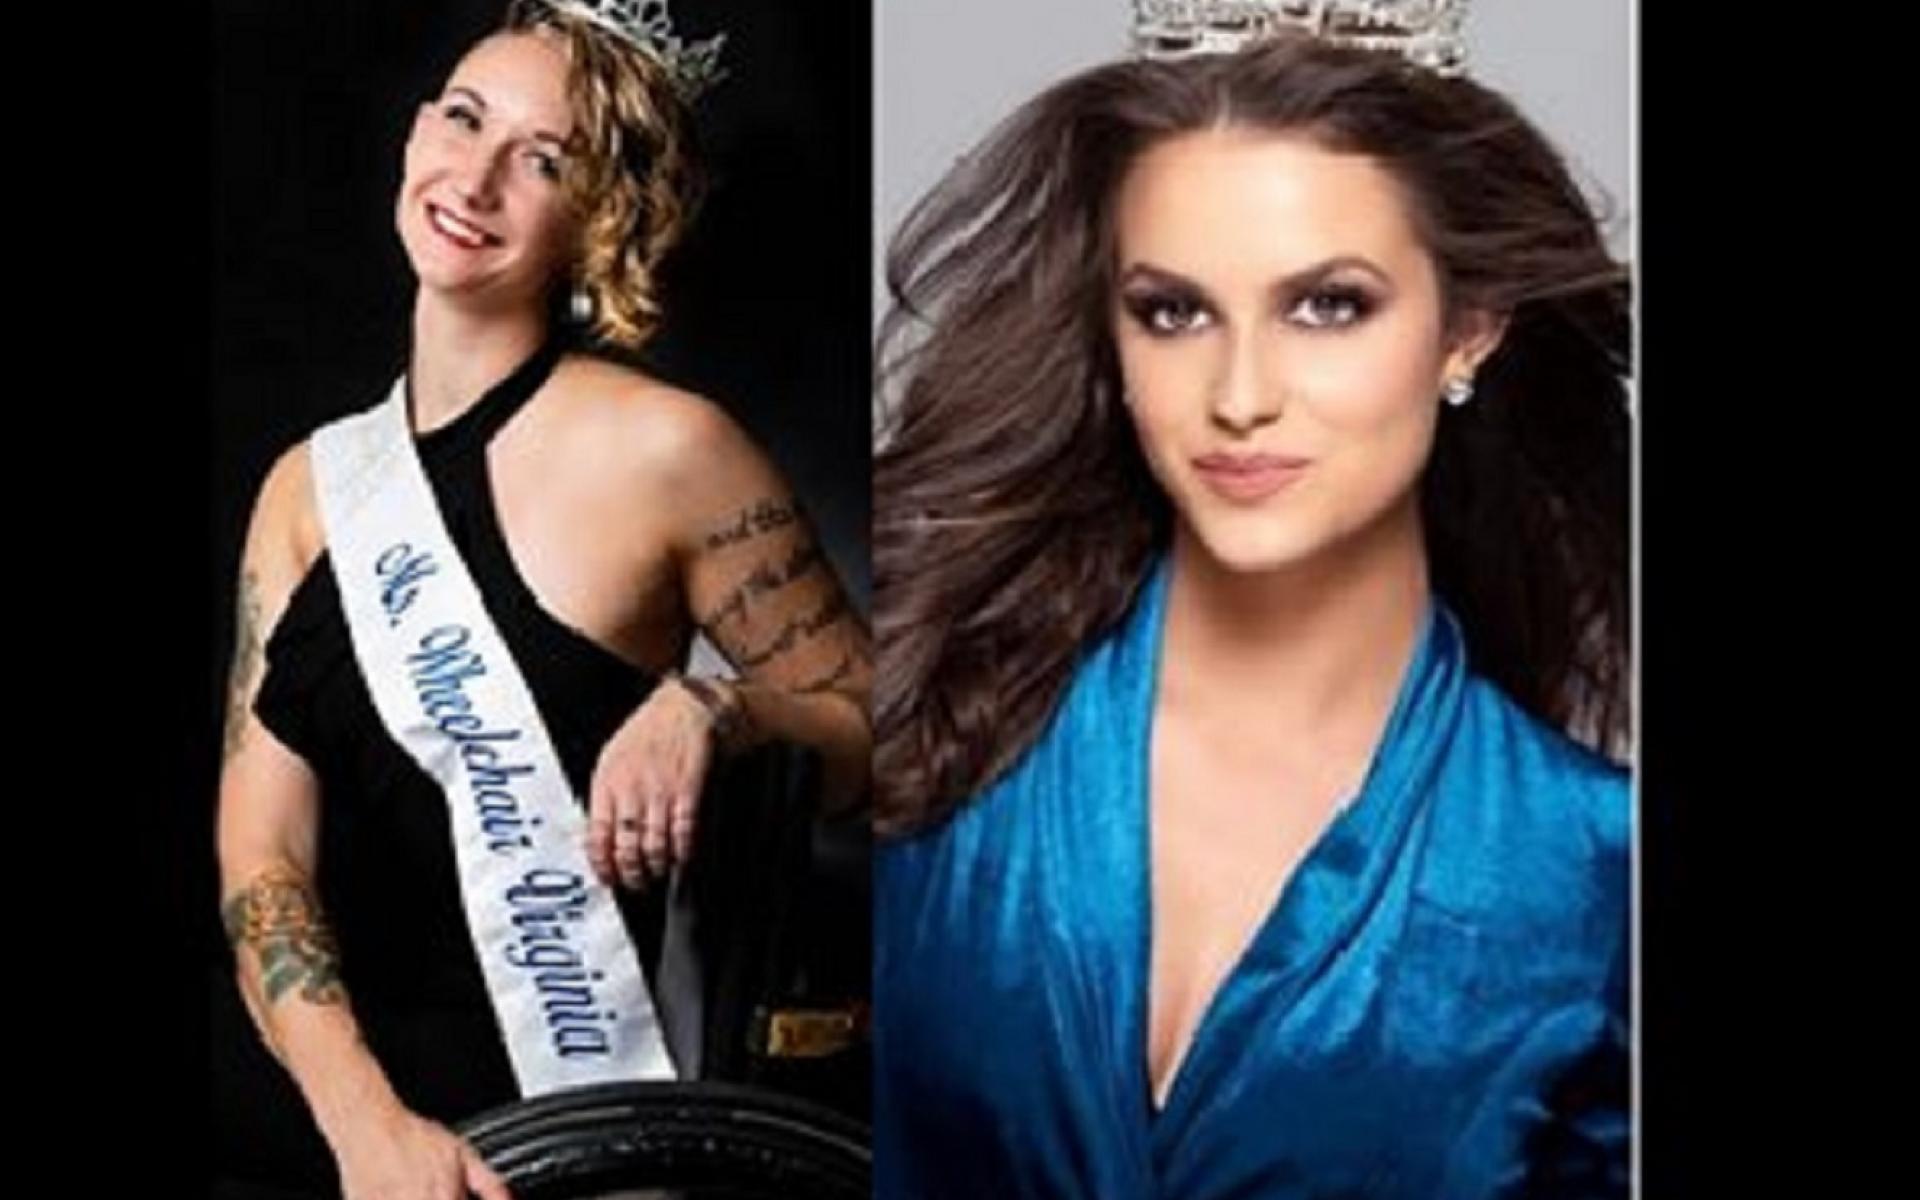 Miss America & Ms. Wheelchair Virginia discuss Ehlers Danlos syndrome